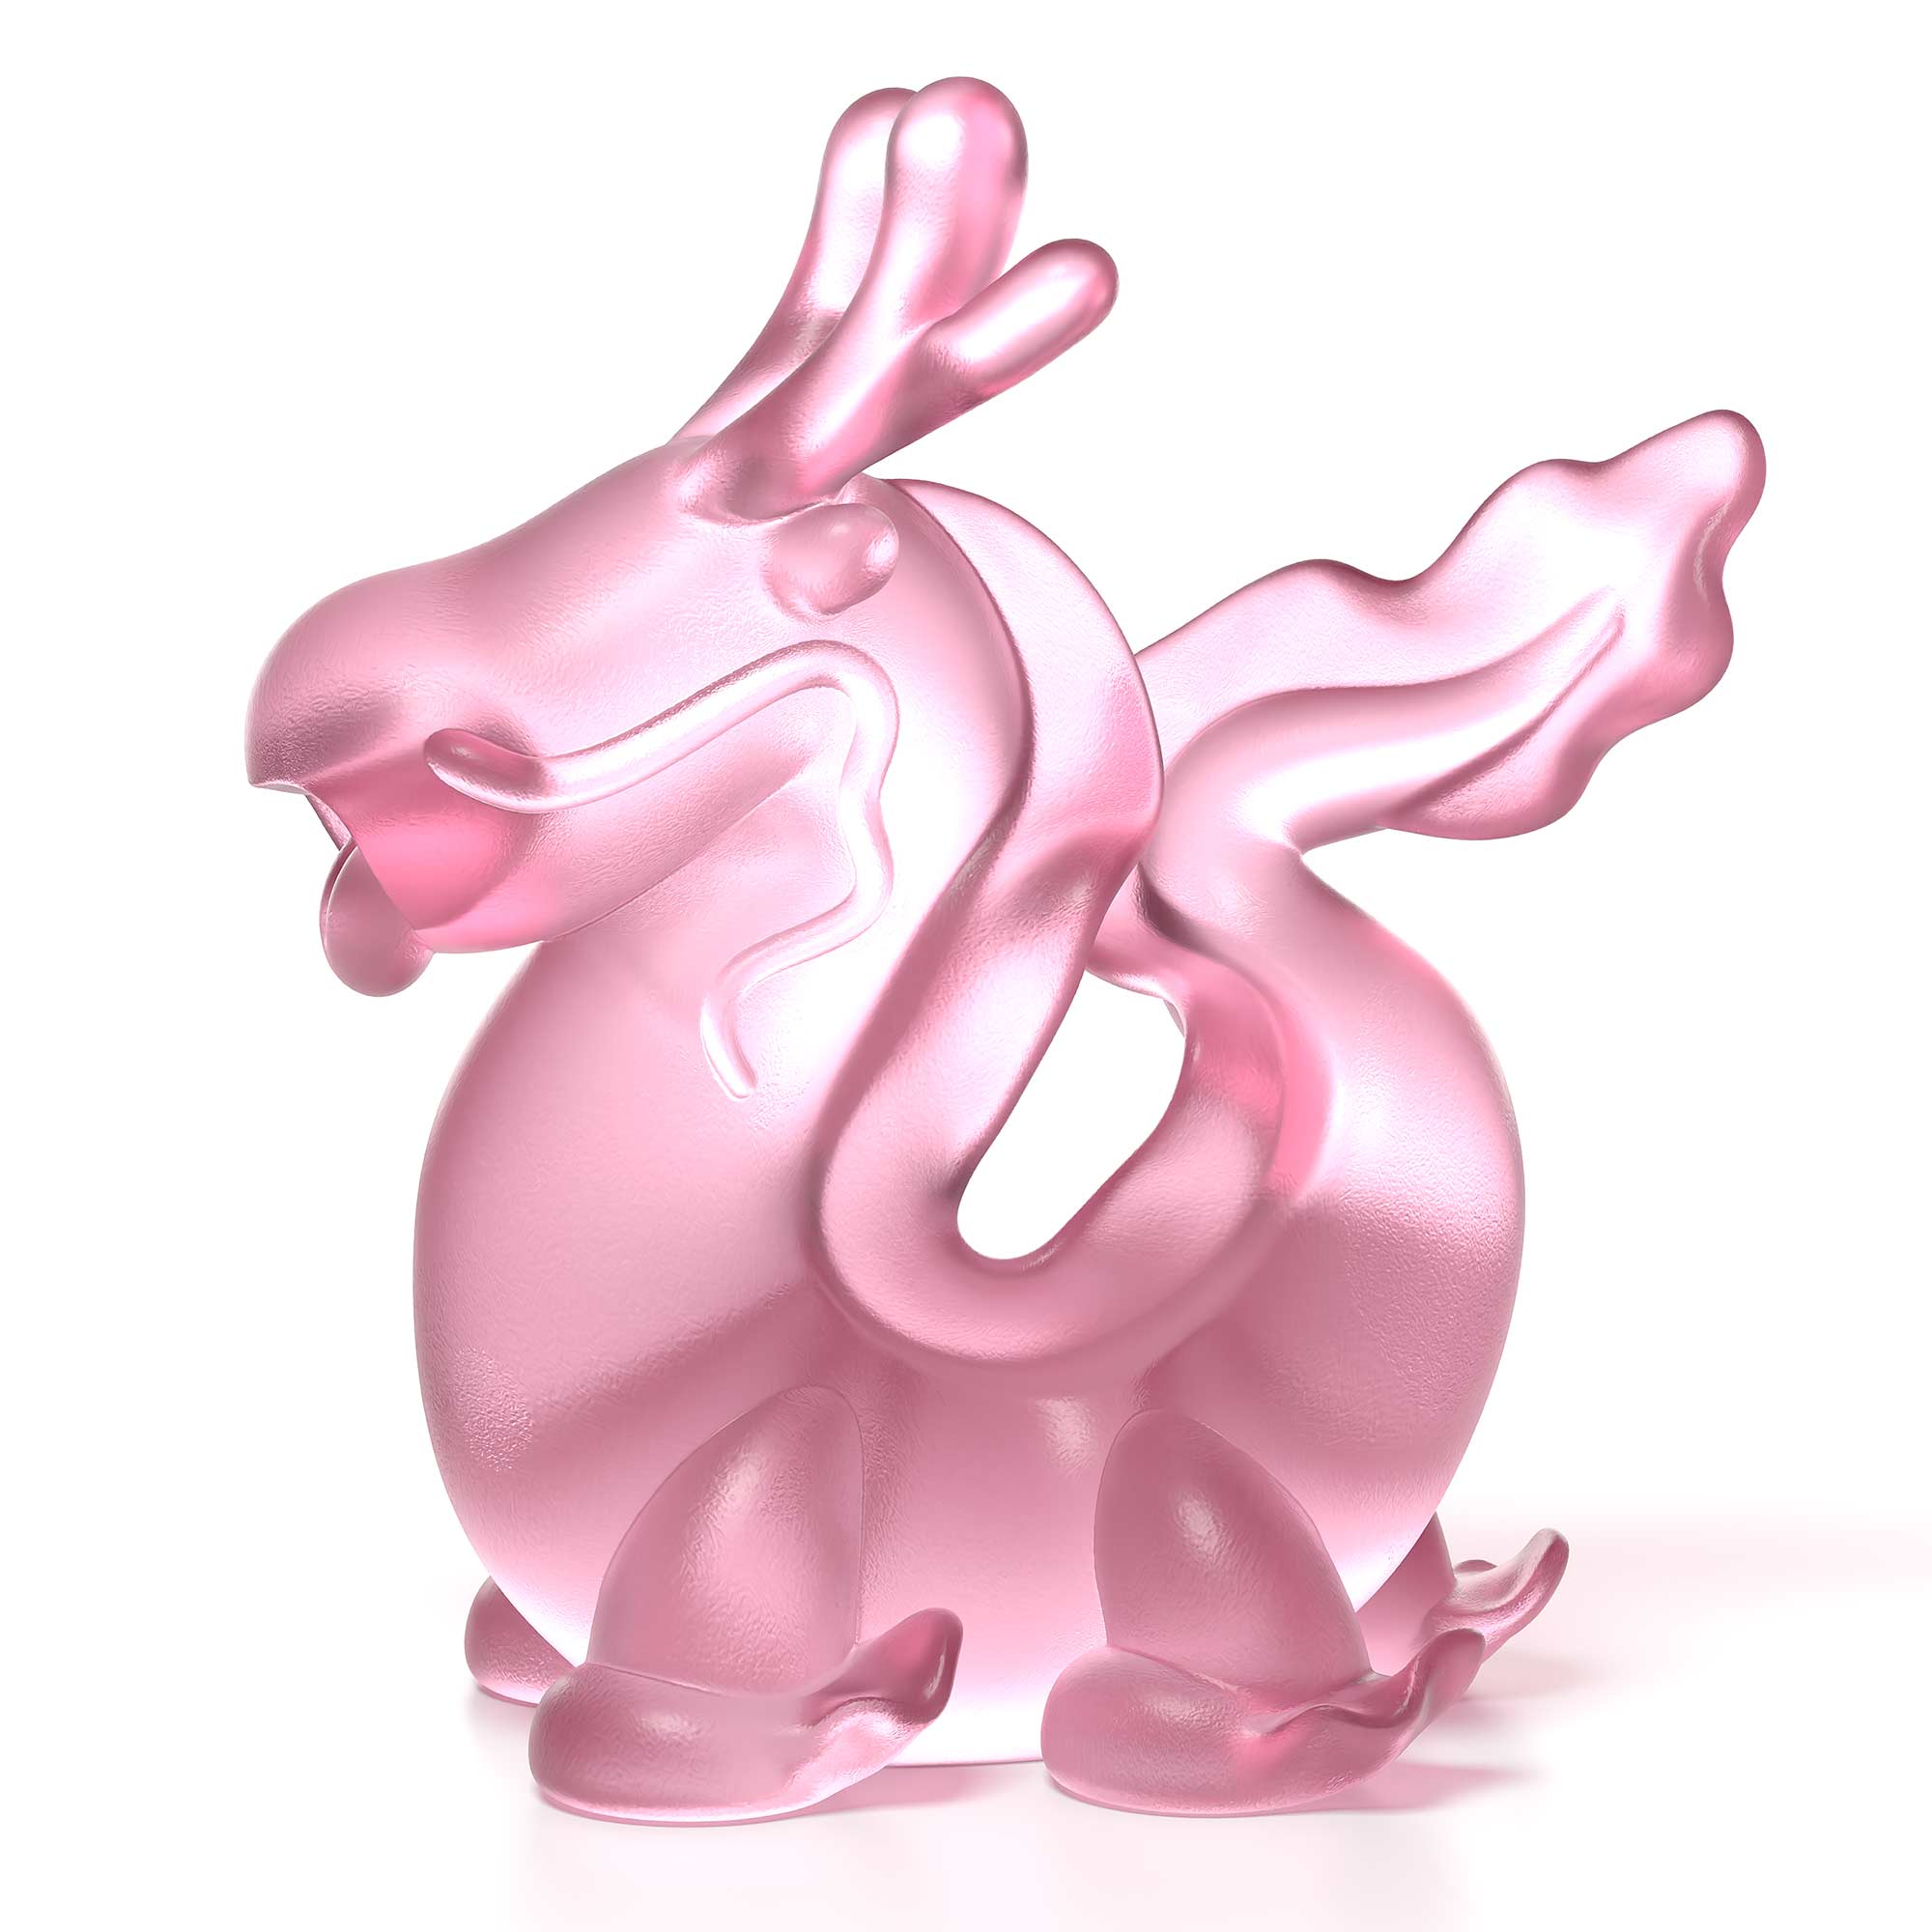 Dragon's Breath pink crystal sculpture the size is  16 cm height,  by Ferdi B Dick, Limited edition of 50 side view 3